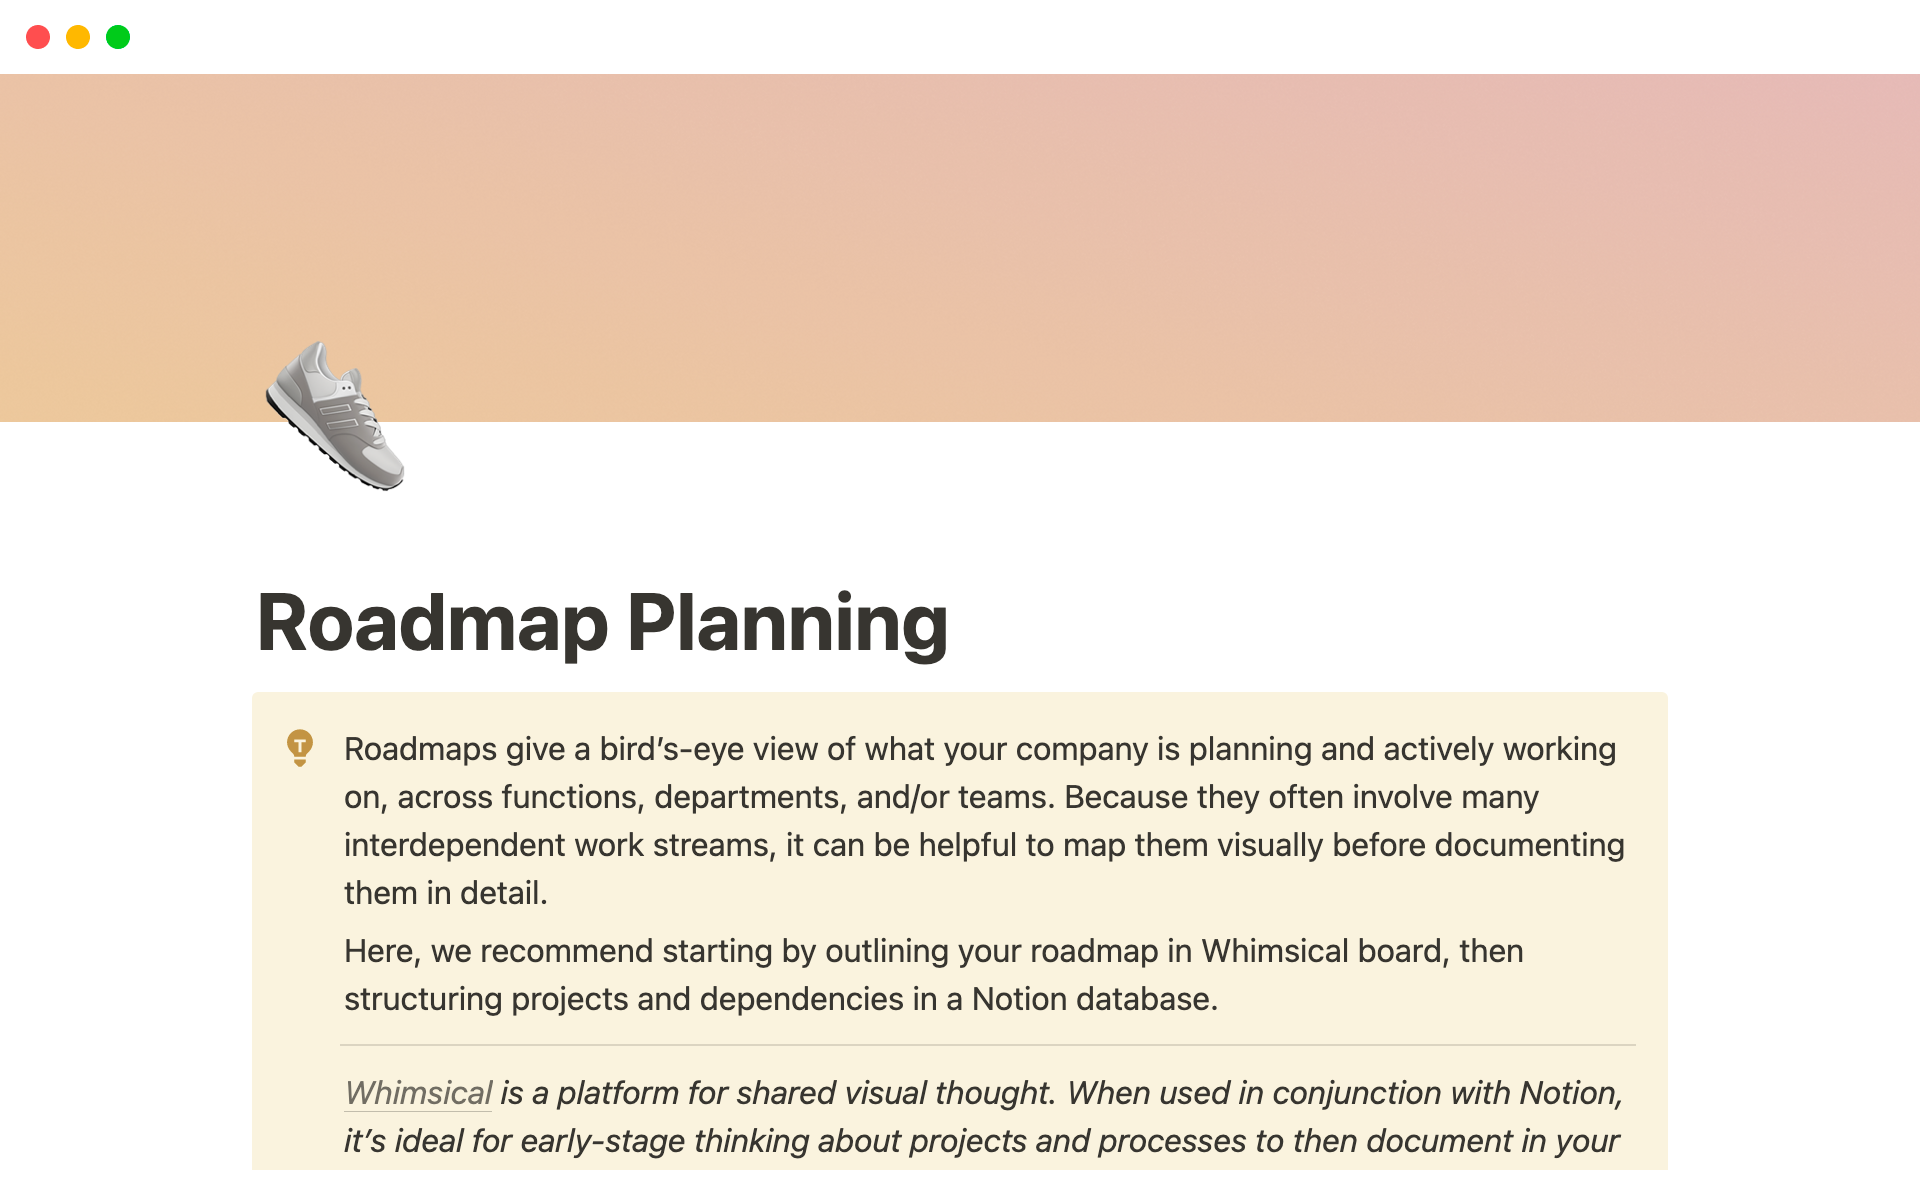 The Roadmap Planning template provides a structure for creating a roadmap and outlining associated projects and tasks to make that roadmap a reality.